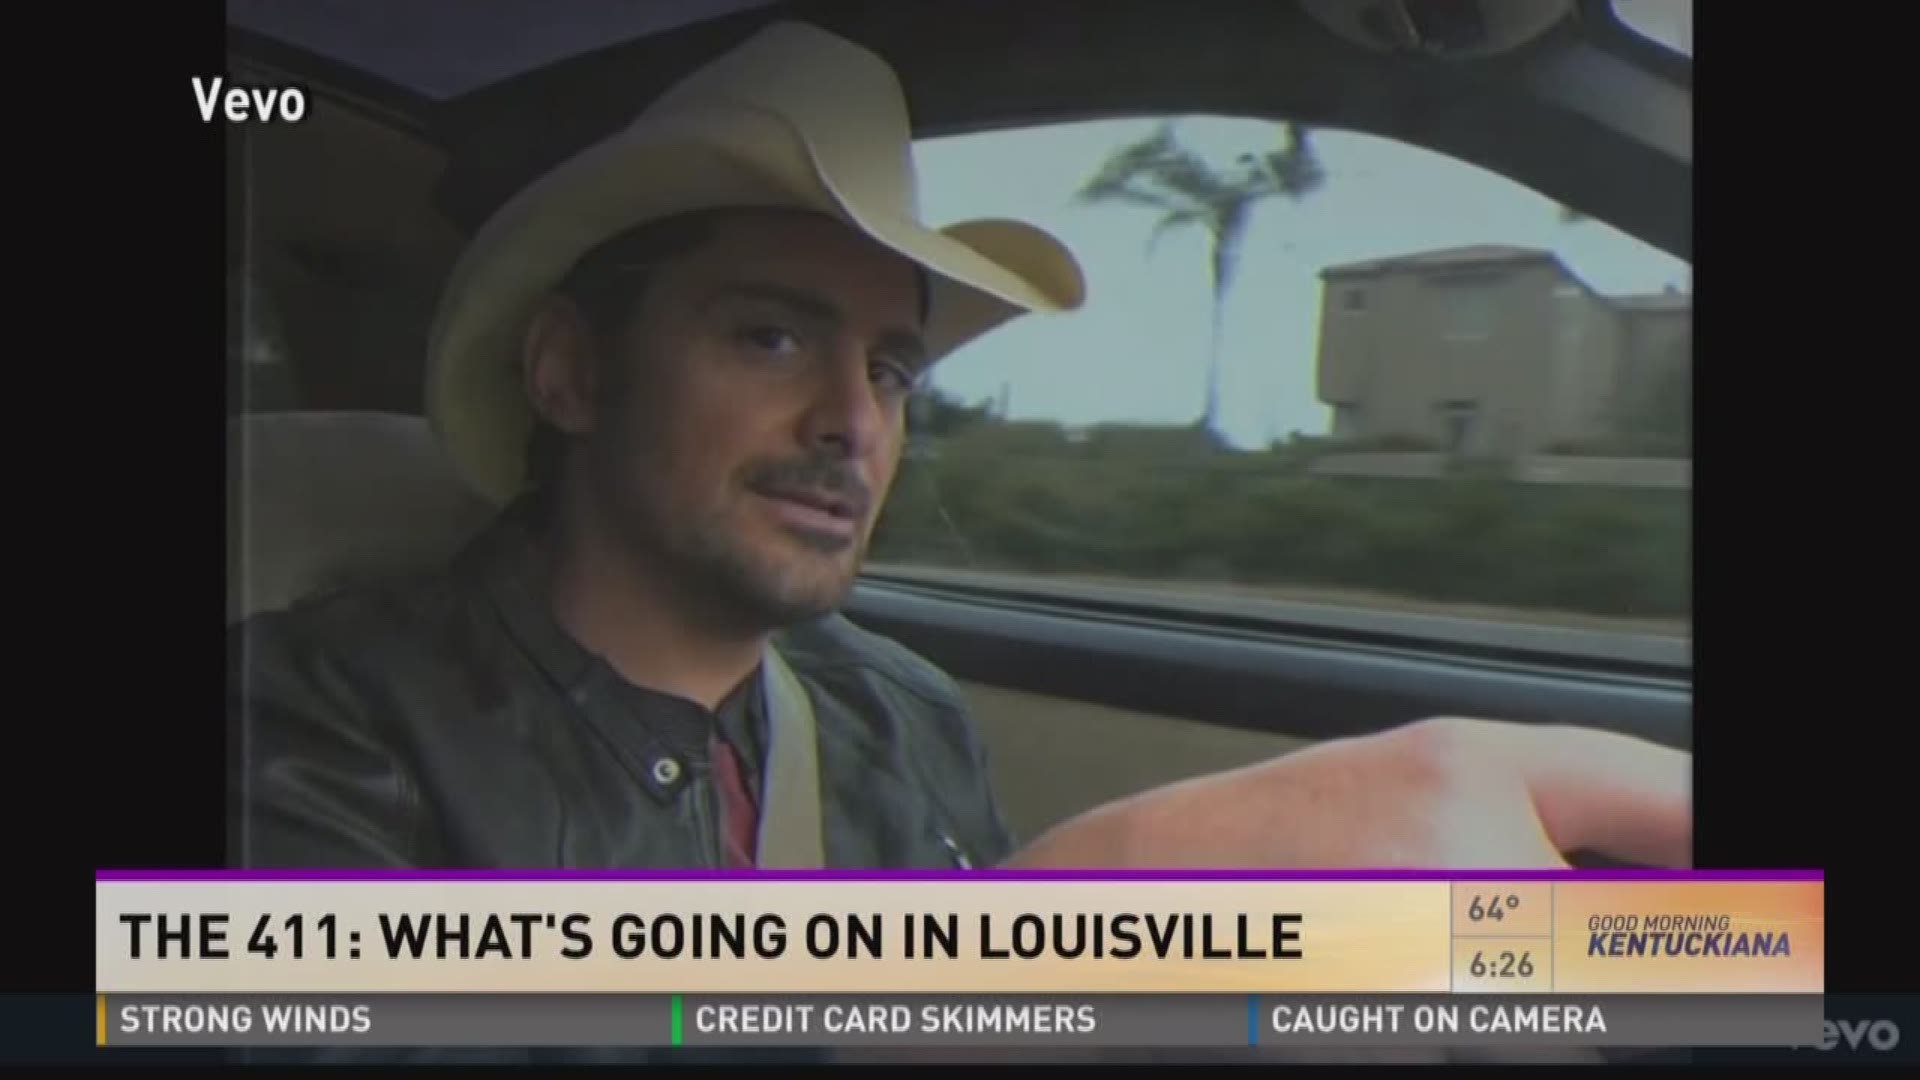 The 411: Taylor Swift, Brad Paisley coming to Louisville